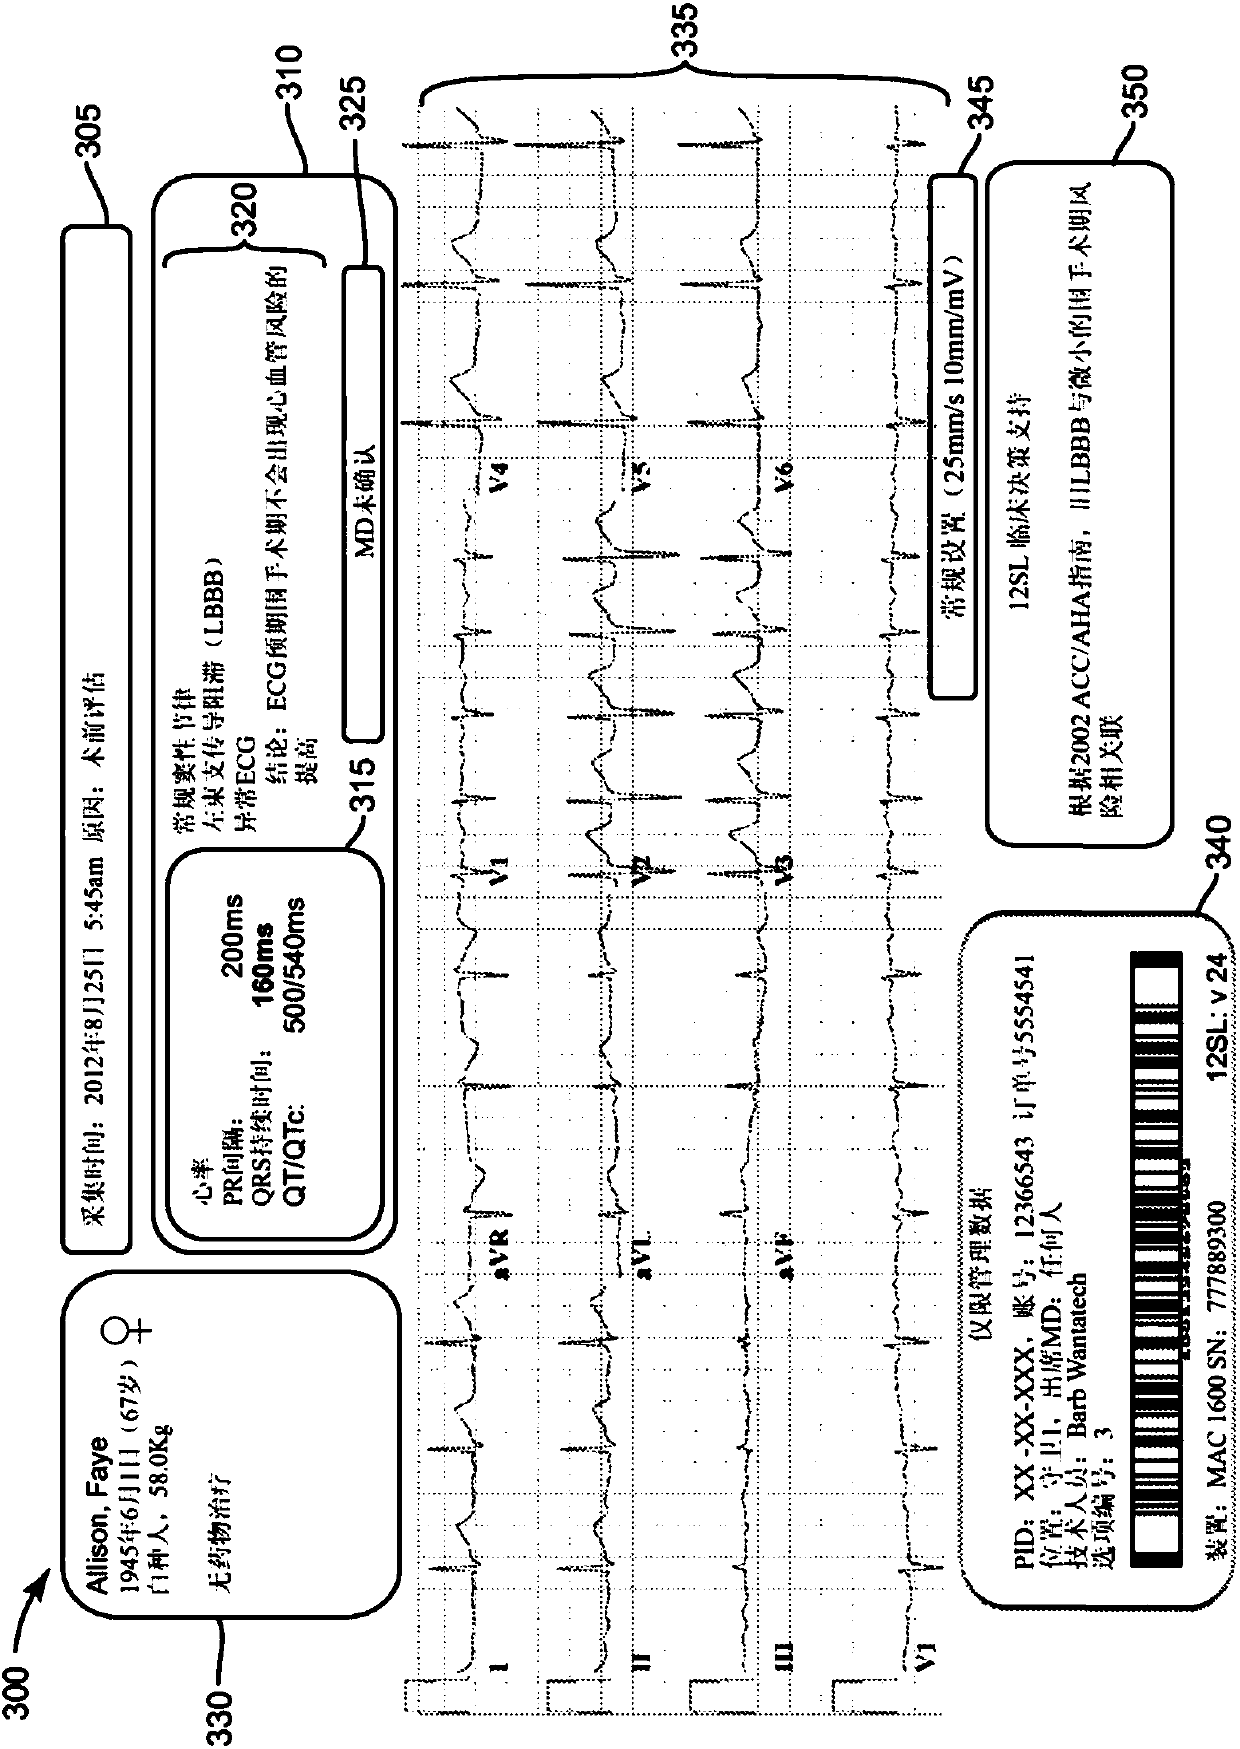 System for providing electrocardiogram (ECG) analytics for electronic medical records (EMR)